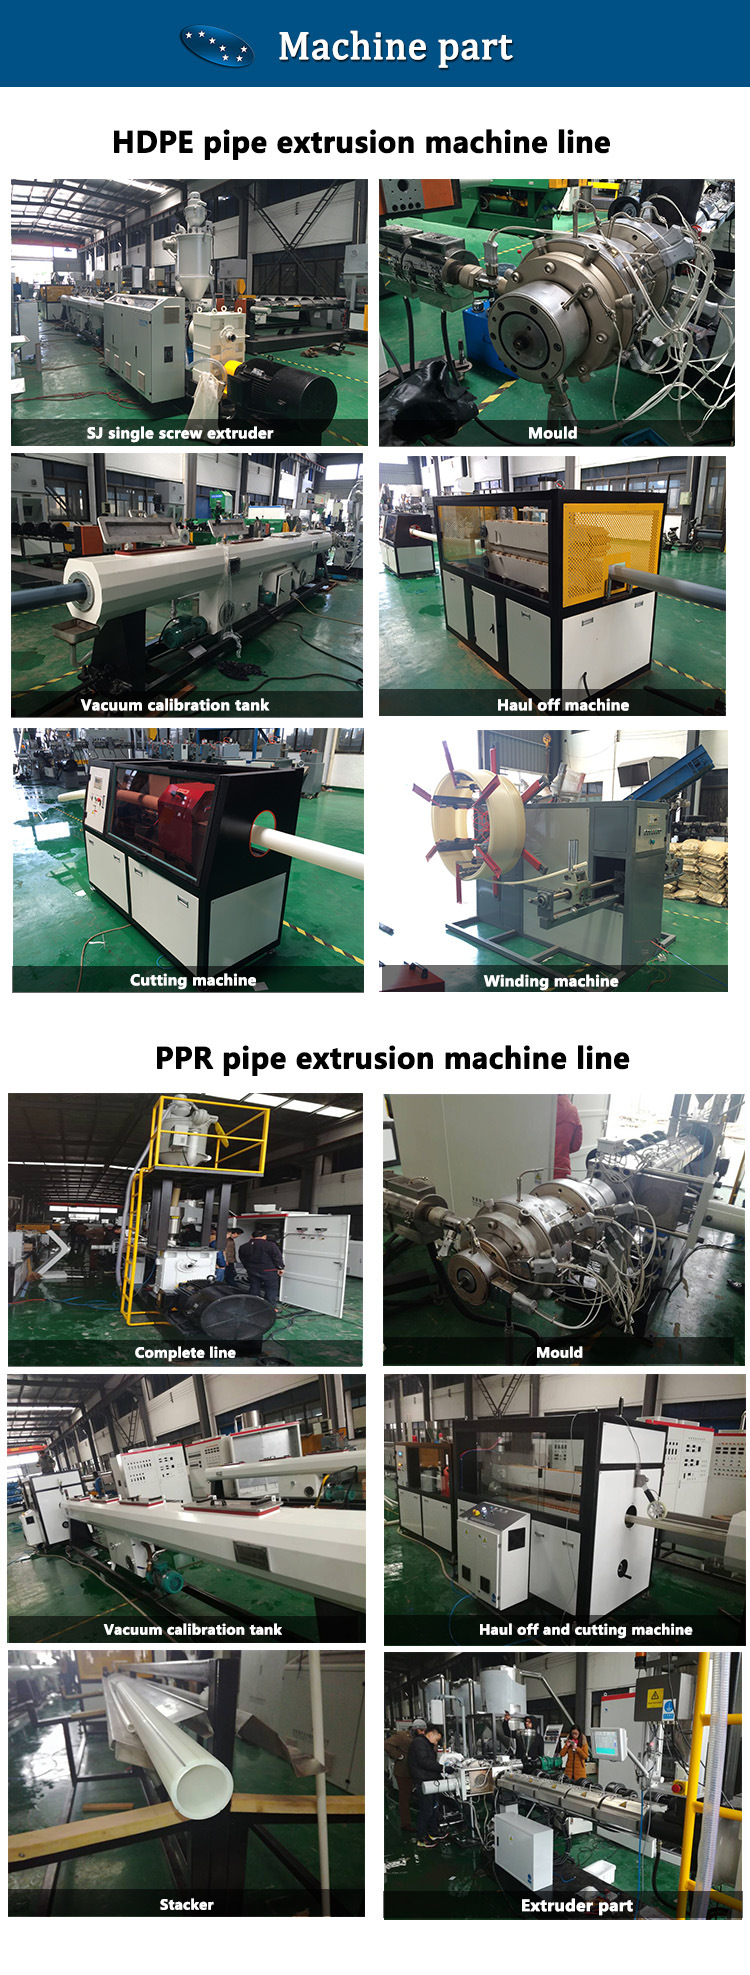 PE PPR Pipe Extrusion Machine Line with Mark Line